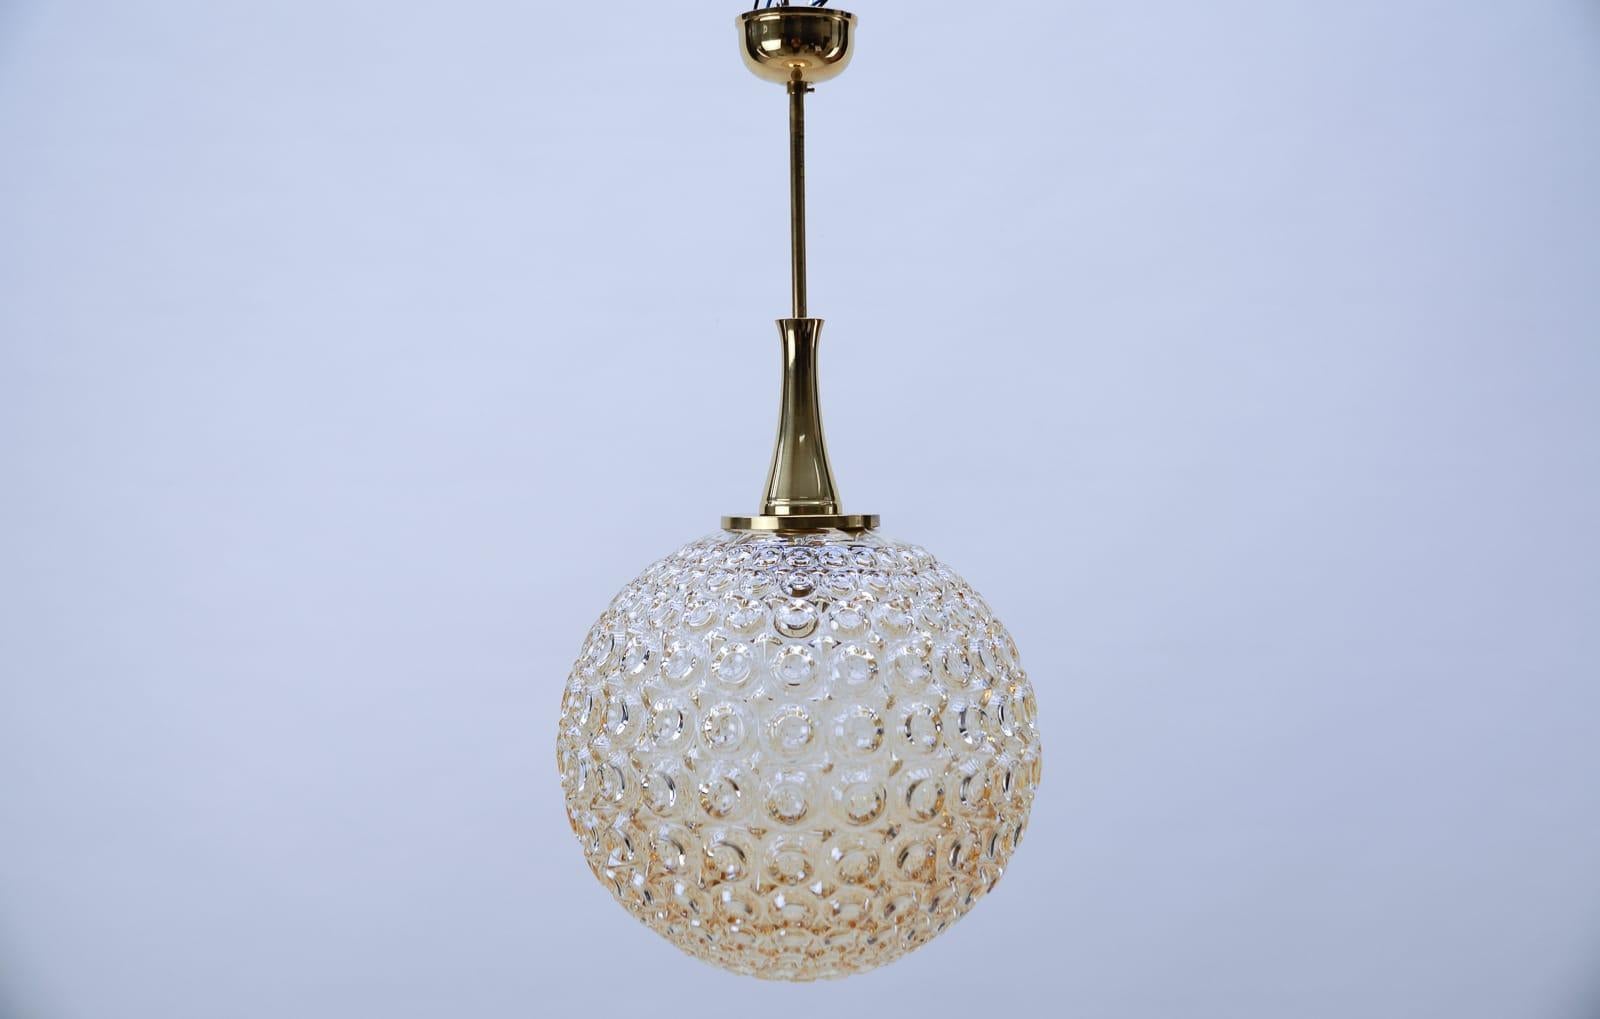 Giant bubble glass amber pendant lamp, 1960s

Fully functional.

With an E27 socket. Works with 220V and 110V.

Wiring is suitable for all countries.